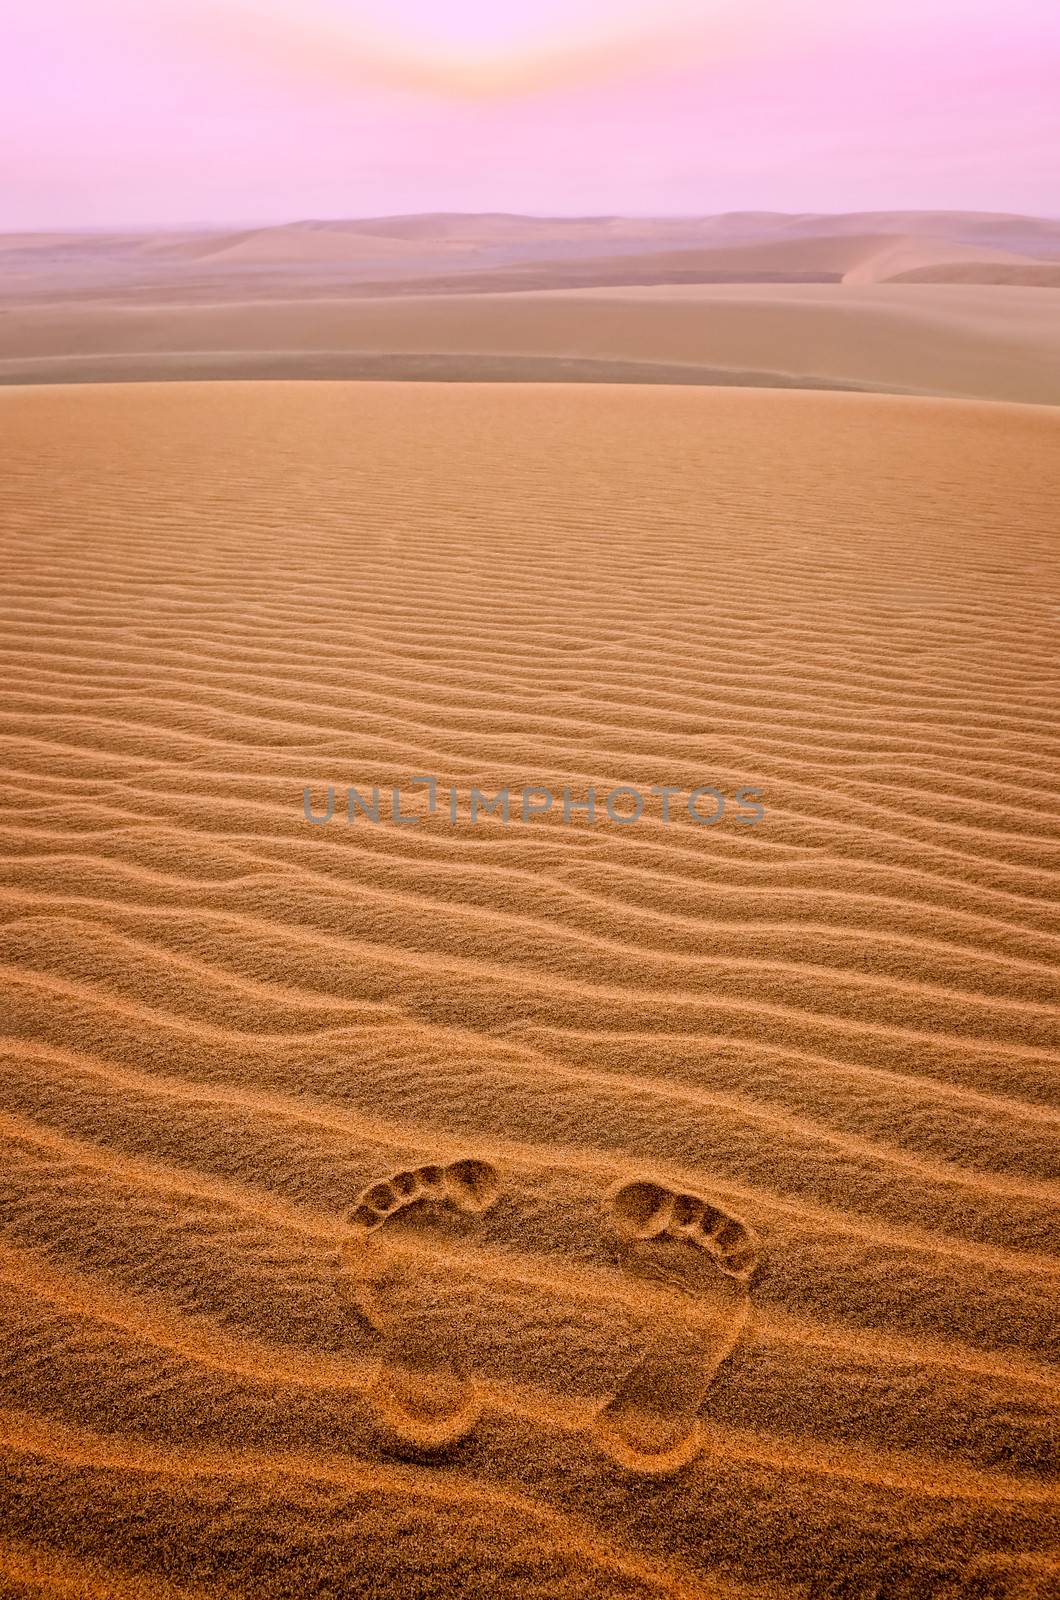 Two footprints in sand in the desert by martinm303